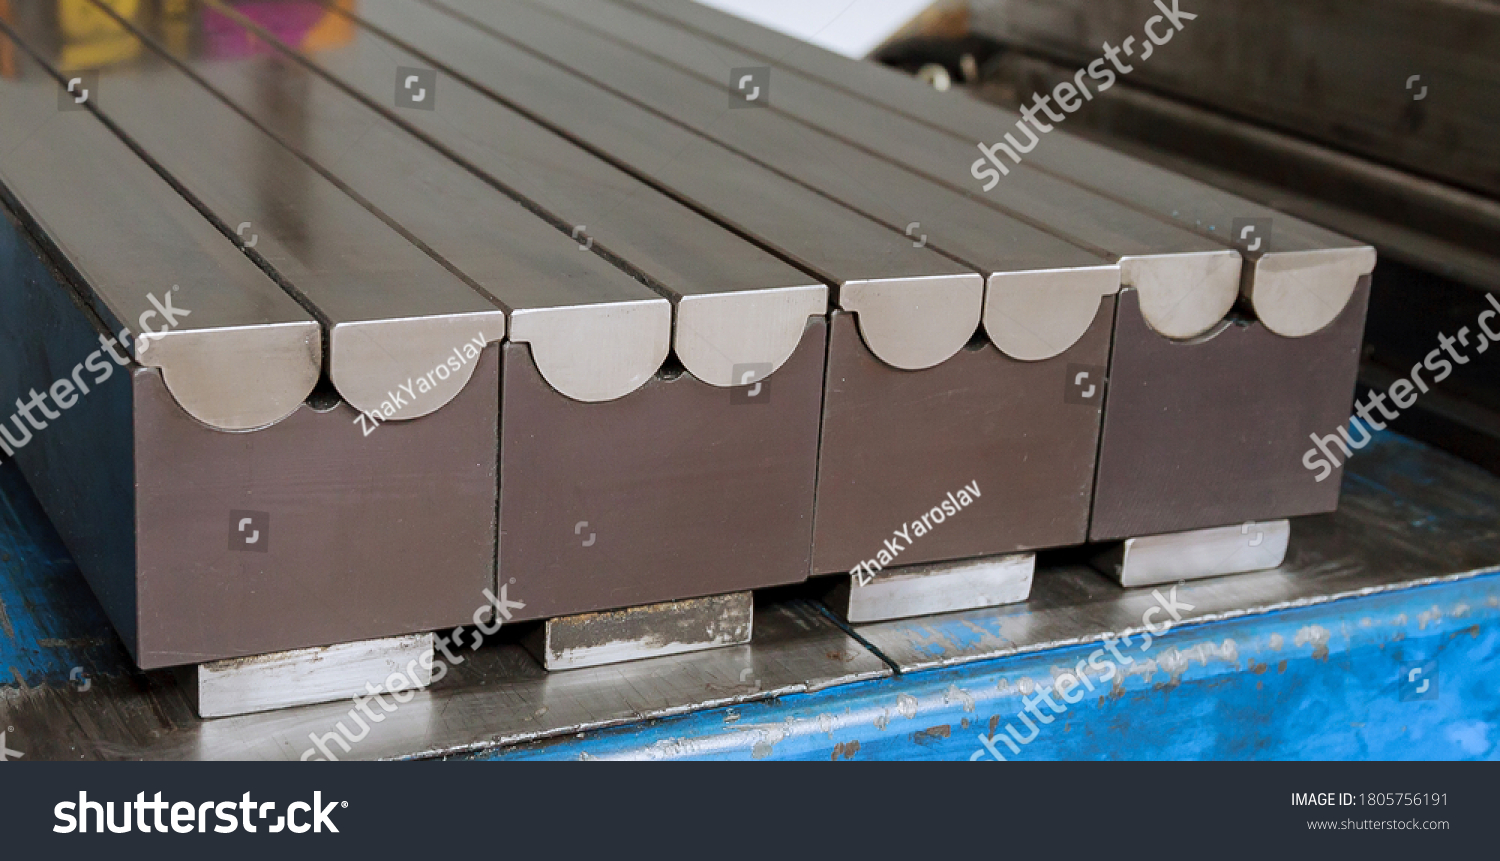 Stock Photo Sheet Metal Bending Tool And Equipment Bend Tools Press Brake Punch And Die 1805756191 